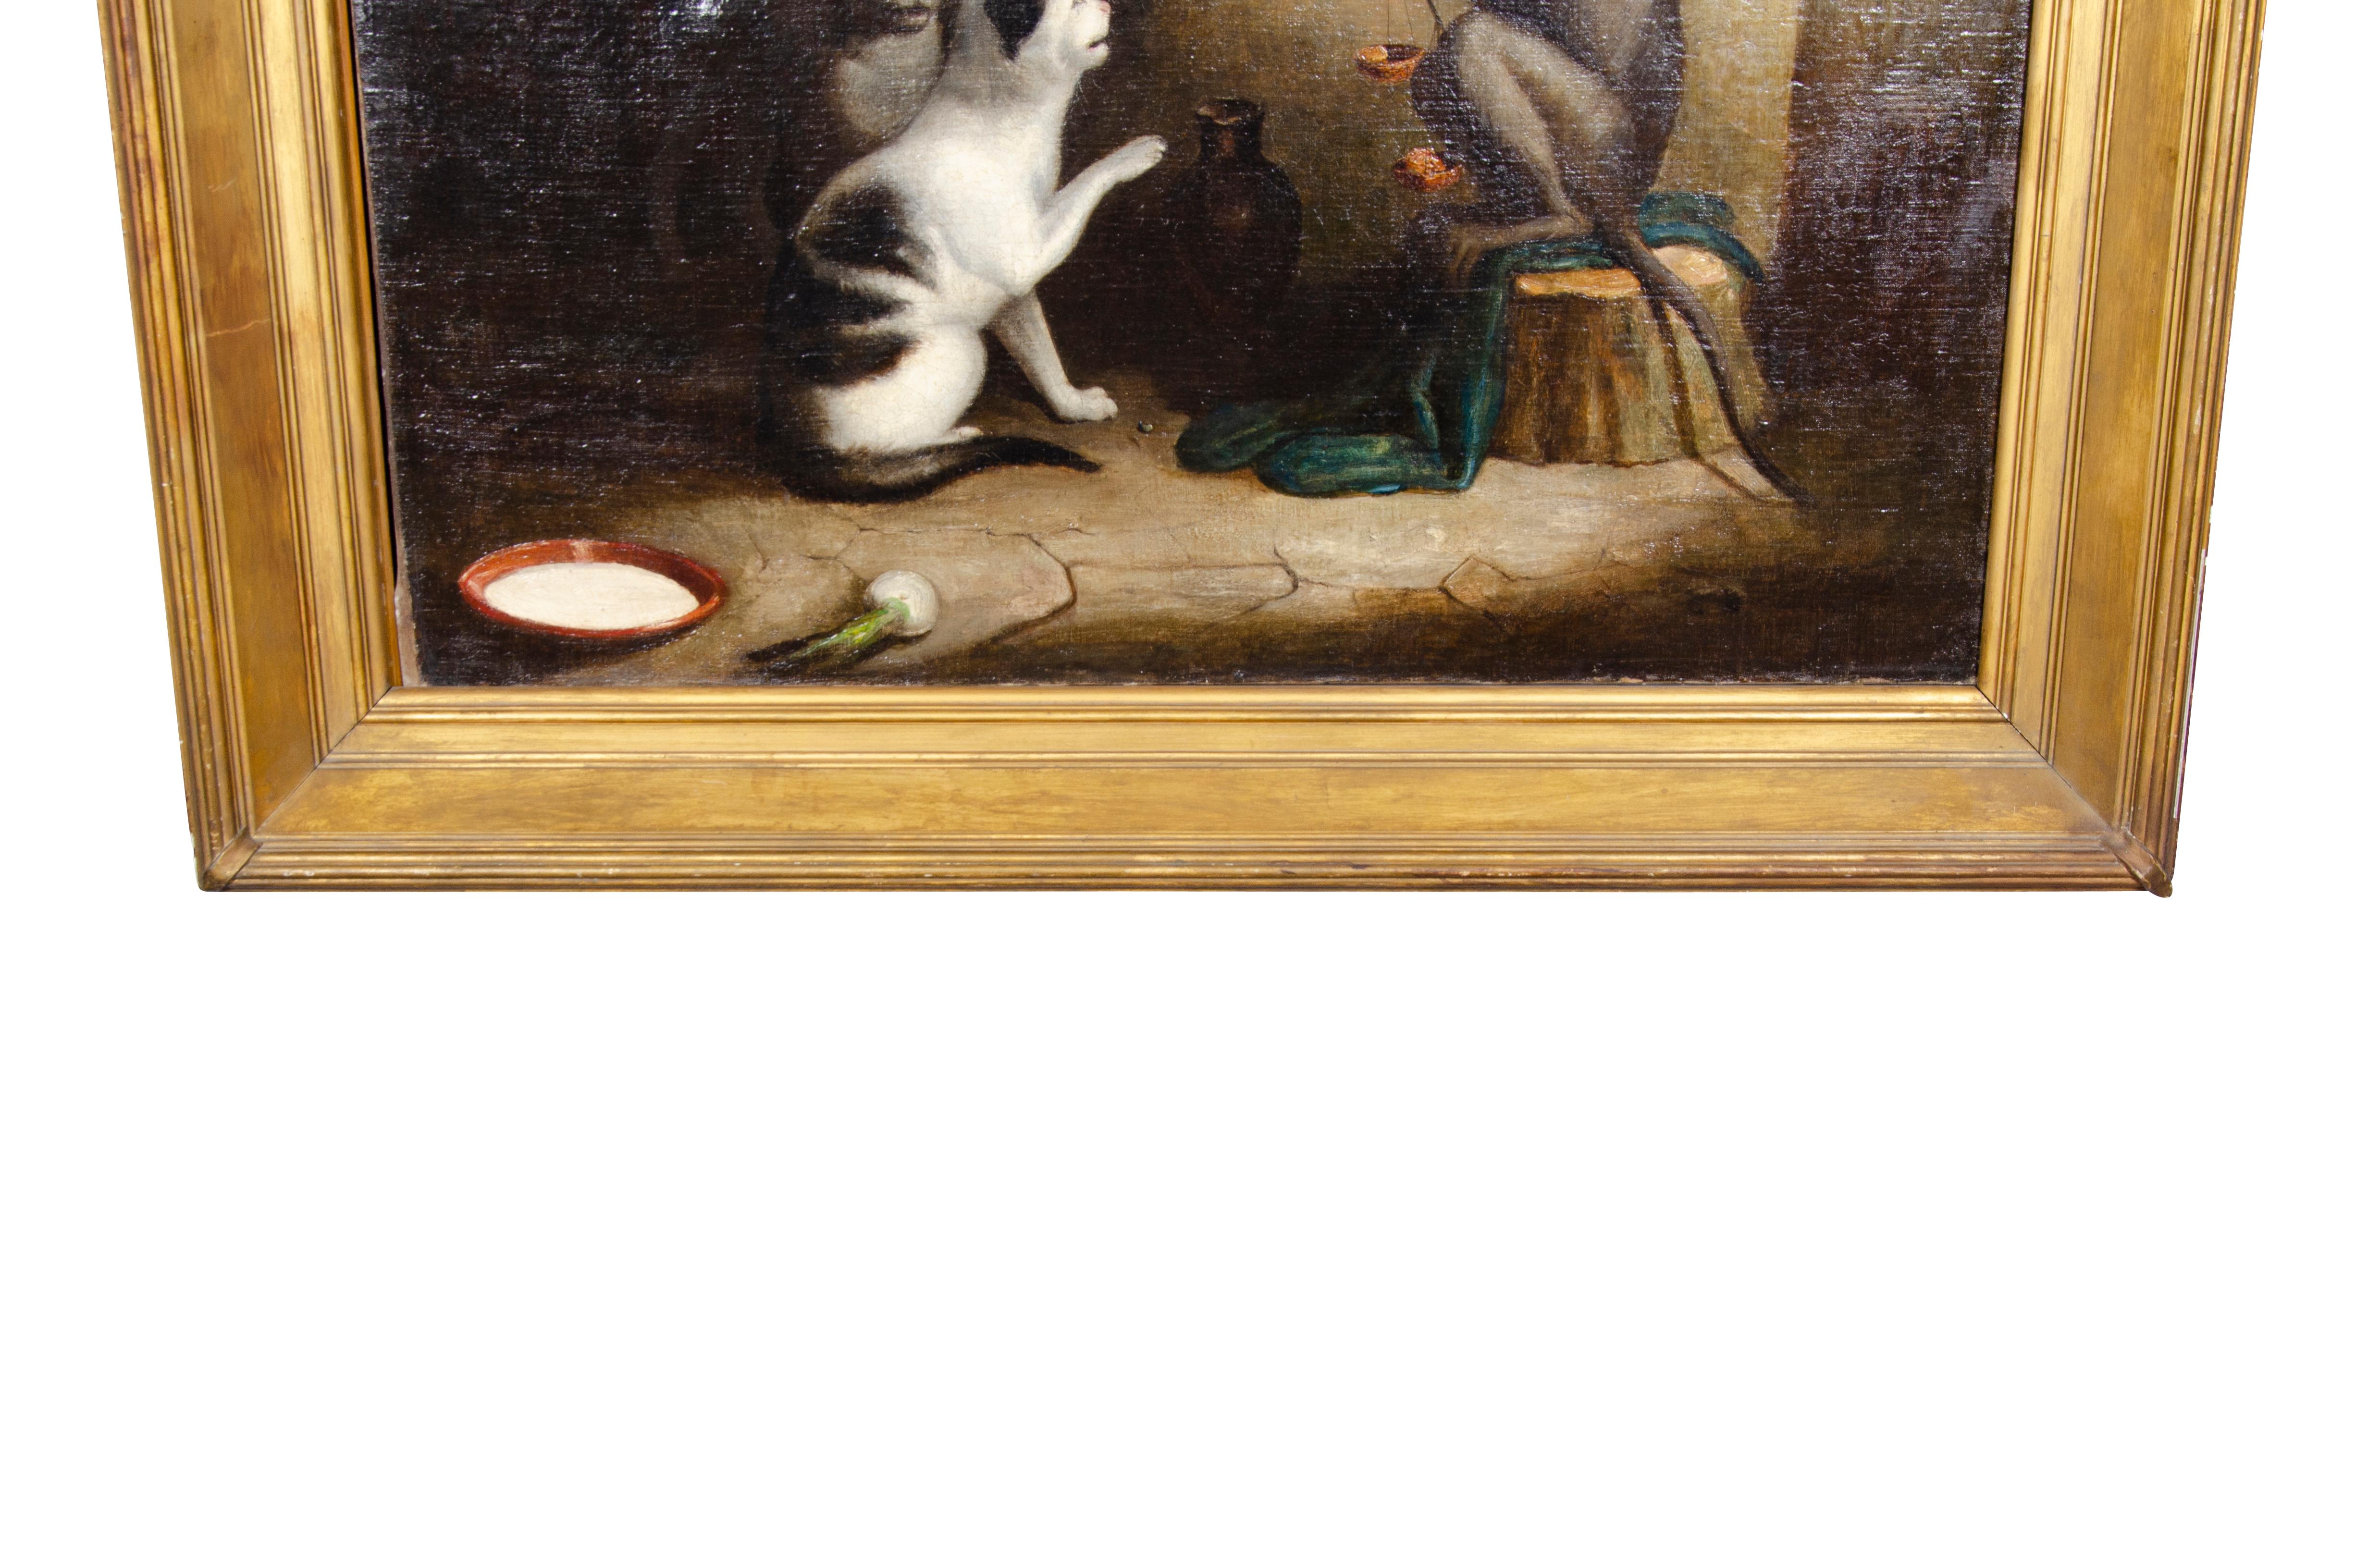 18th Century European Oil on Canvas of a Monkey and a Cat Playing